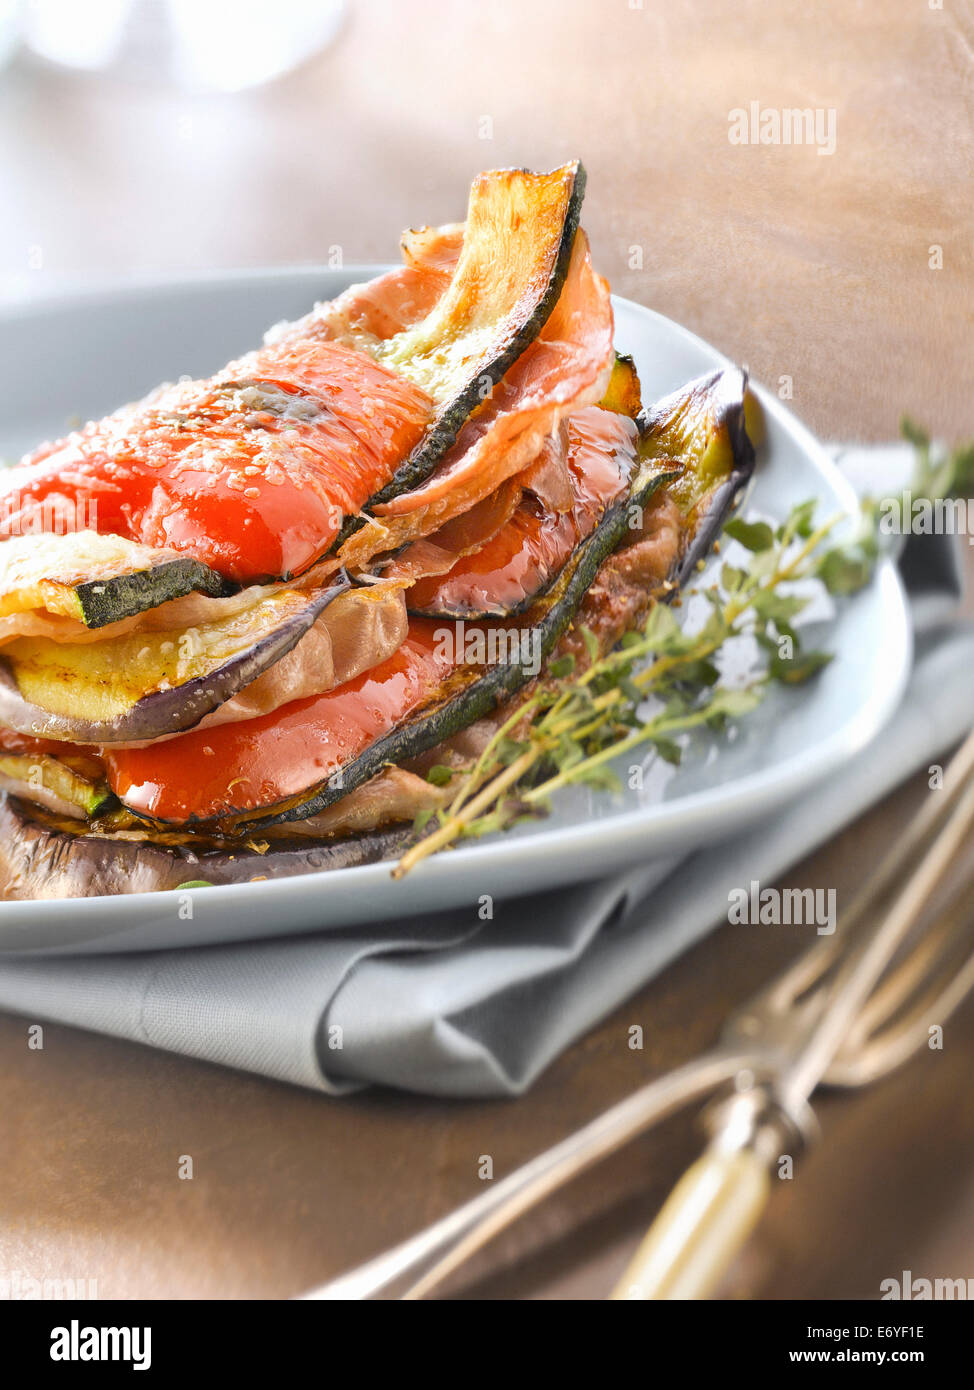 Grilled and layered vegetables and Parma ham Stock Photo